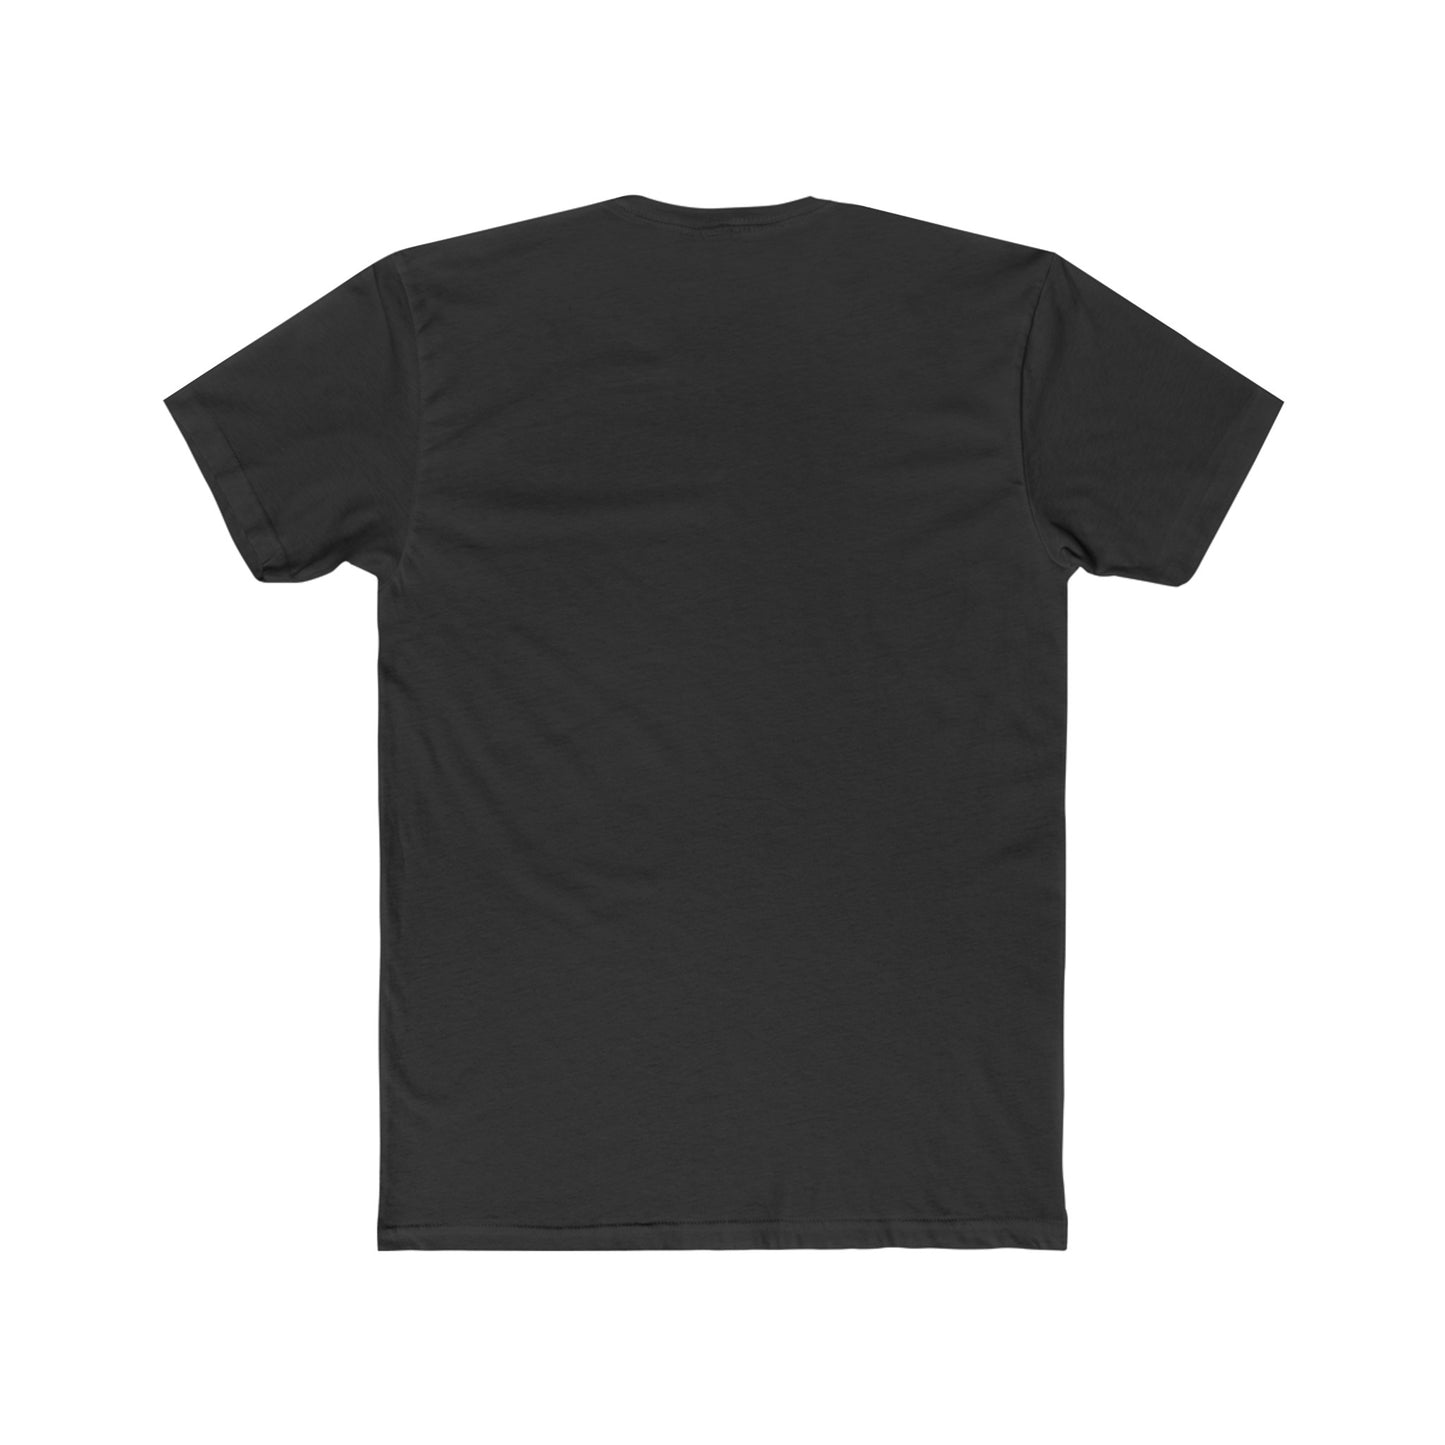 $MFER Token Inspired Men's Premium Fitted Tee - Lightweight & Comfortable for All Occasions